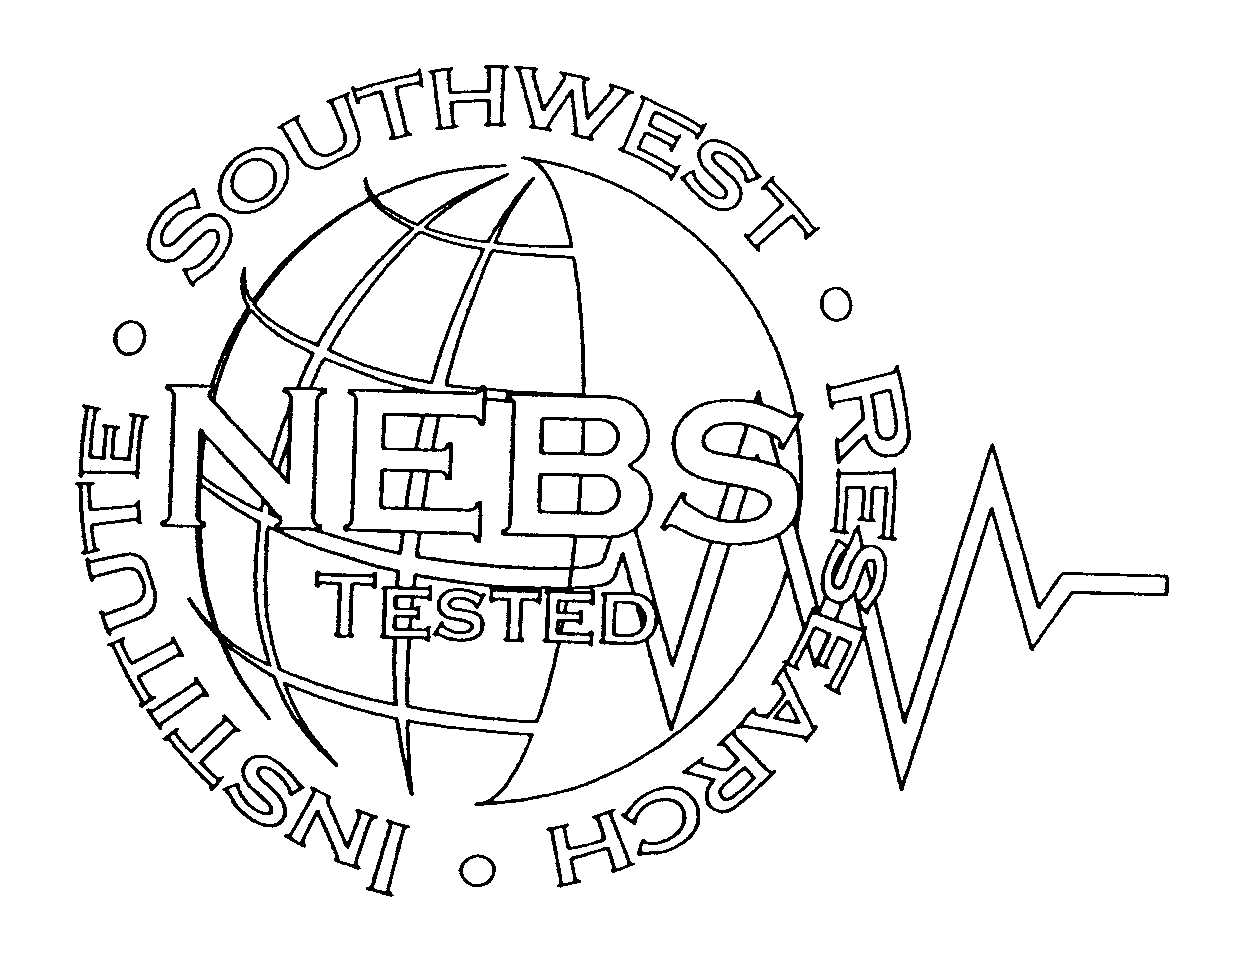 Trademark Logo SOUTHWEST RESEARCH INSTITUTE NEBS TESTED